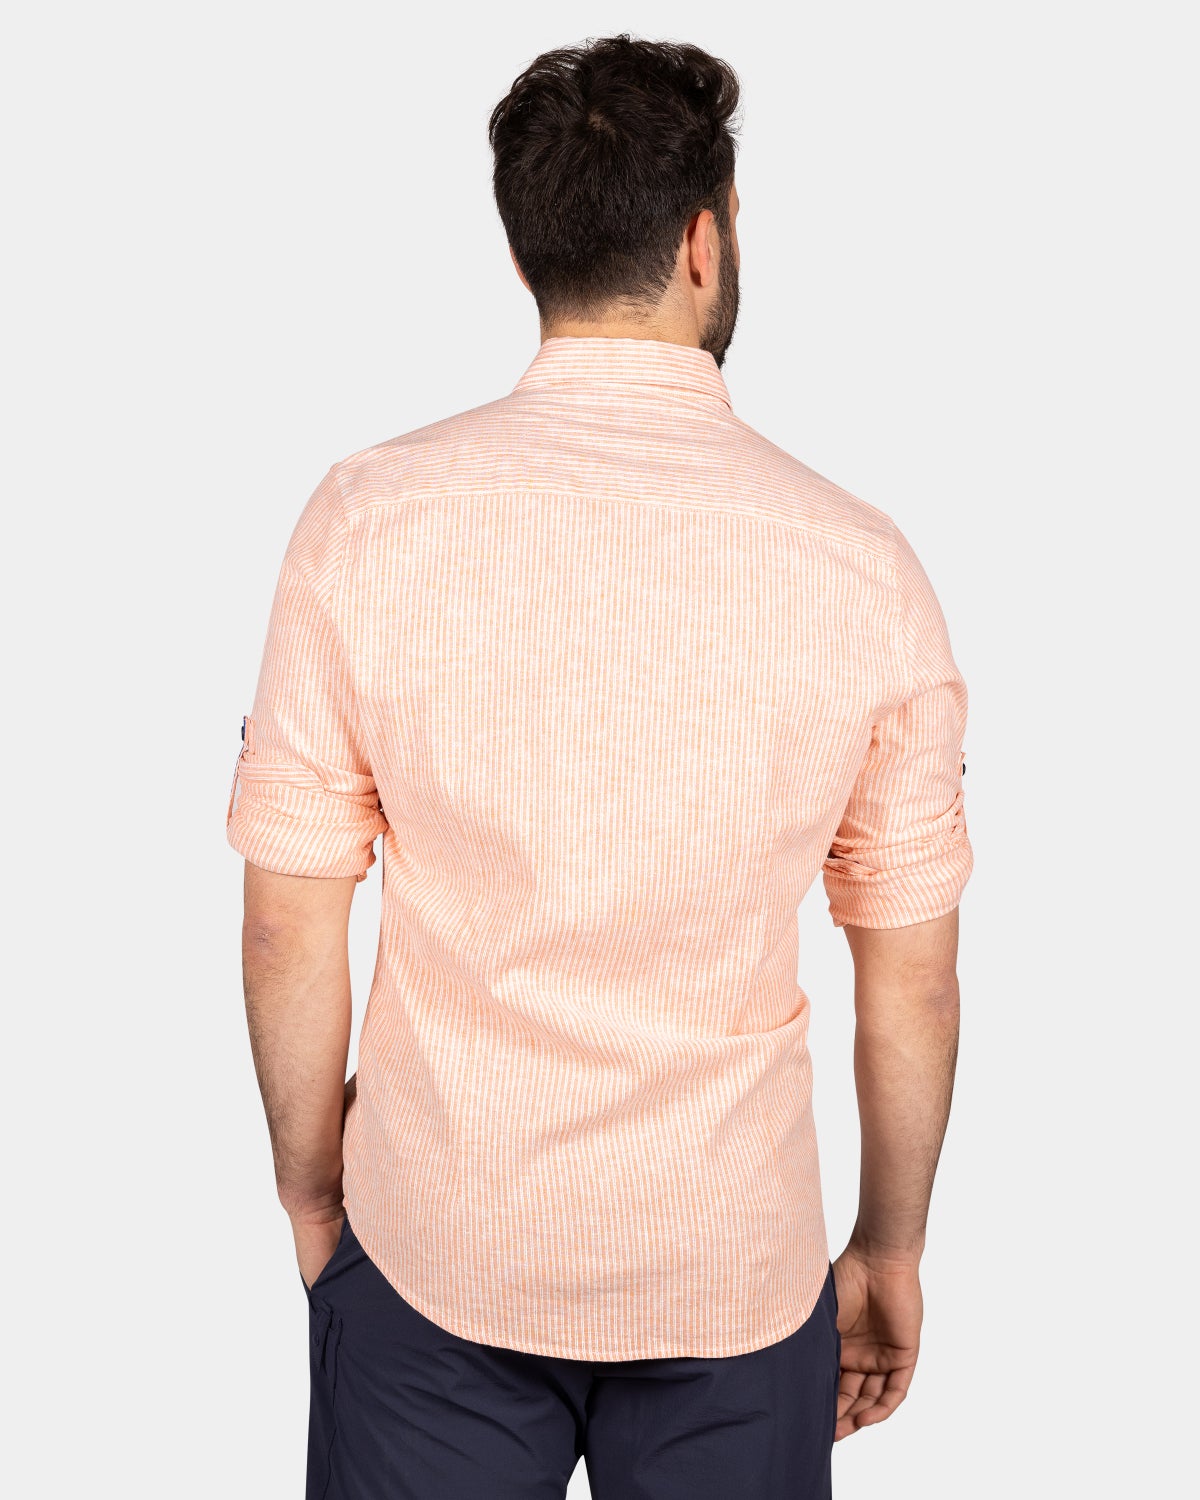 Light-colored shirt made of linen and cotton - Fresh Orange